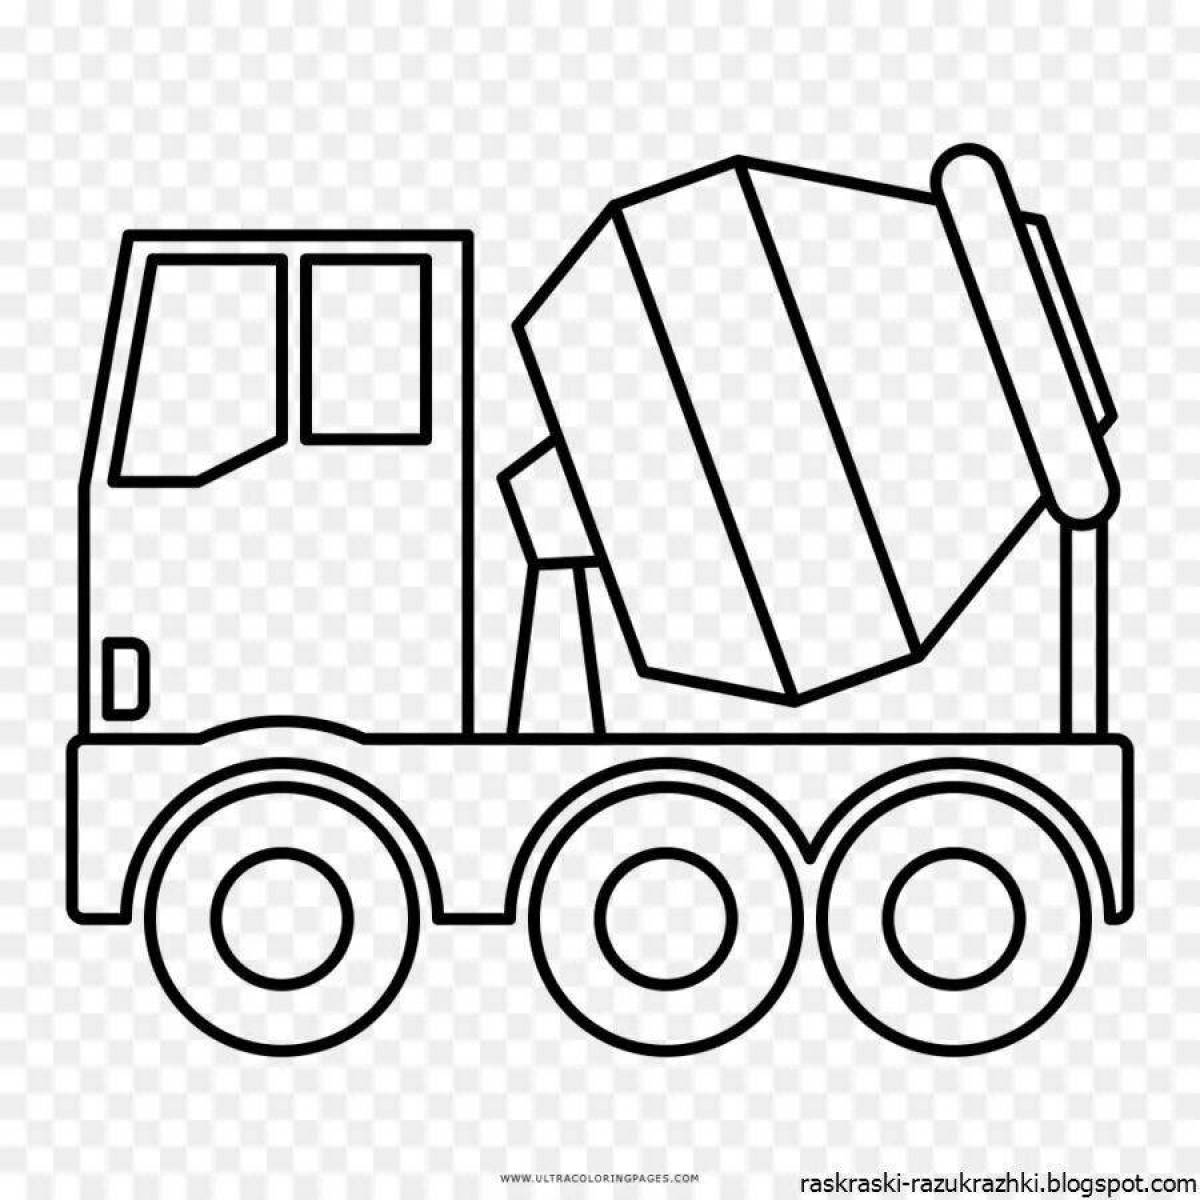 Awesome concrete mixer coloring page